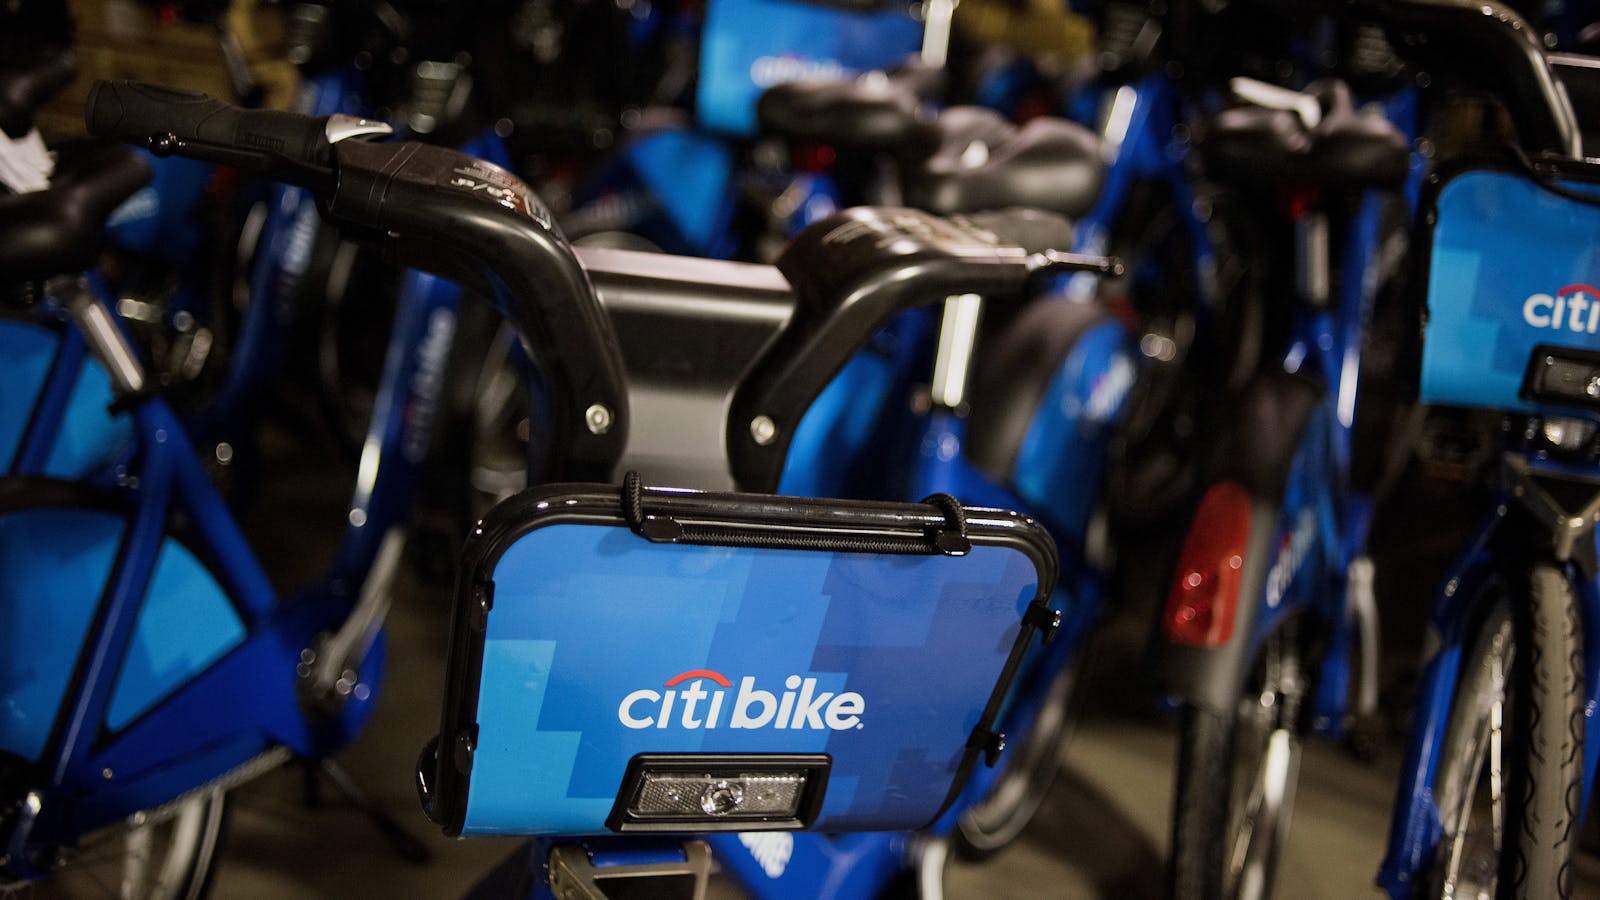 Citibike bicycles, which are operated by Motivate. Photo by Bloomberg.